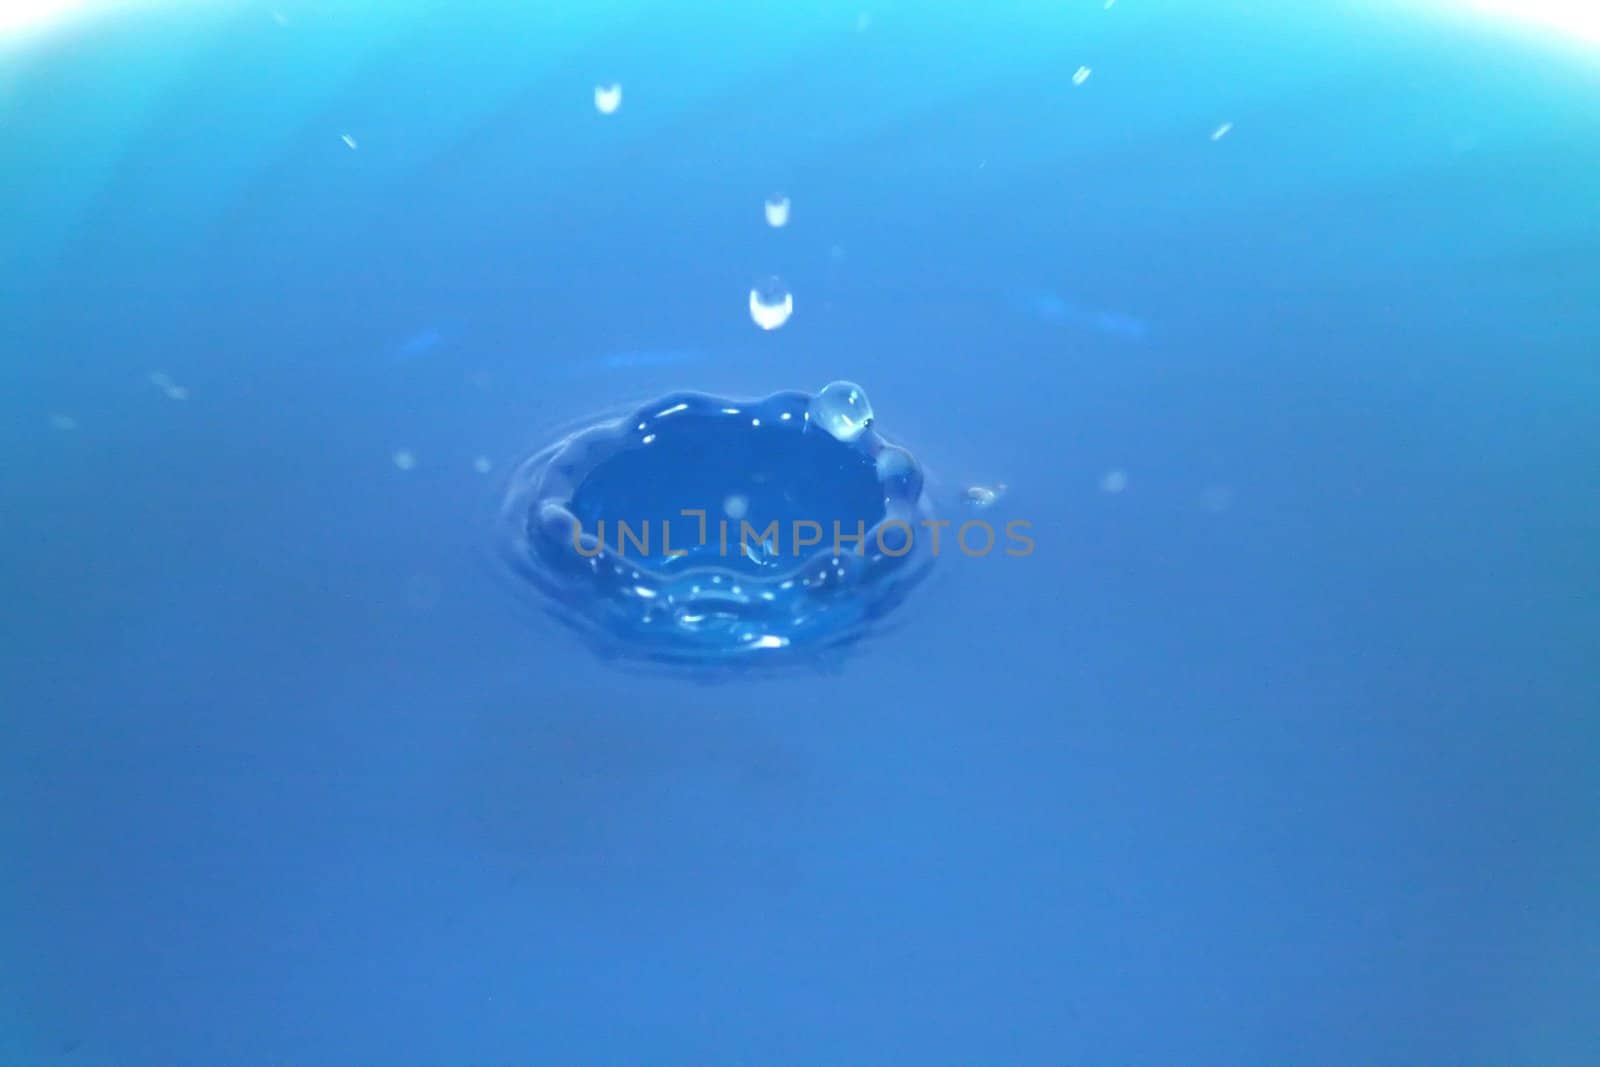 A crown of water rising out of a blue liquid.